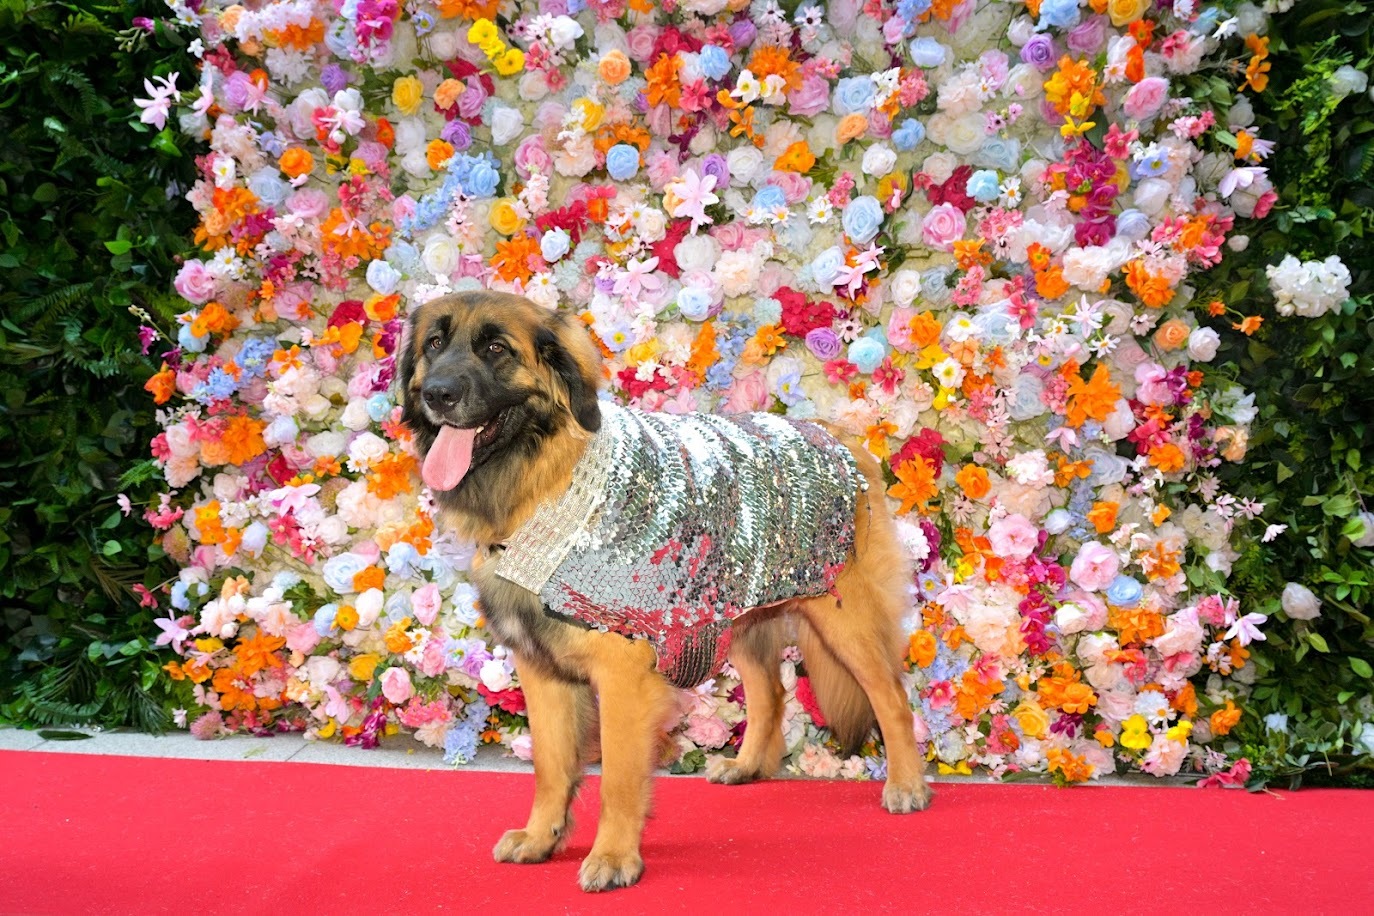 A brown dog in a glittery outfit.